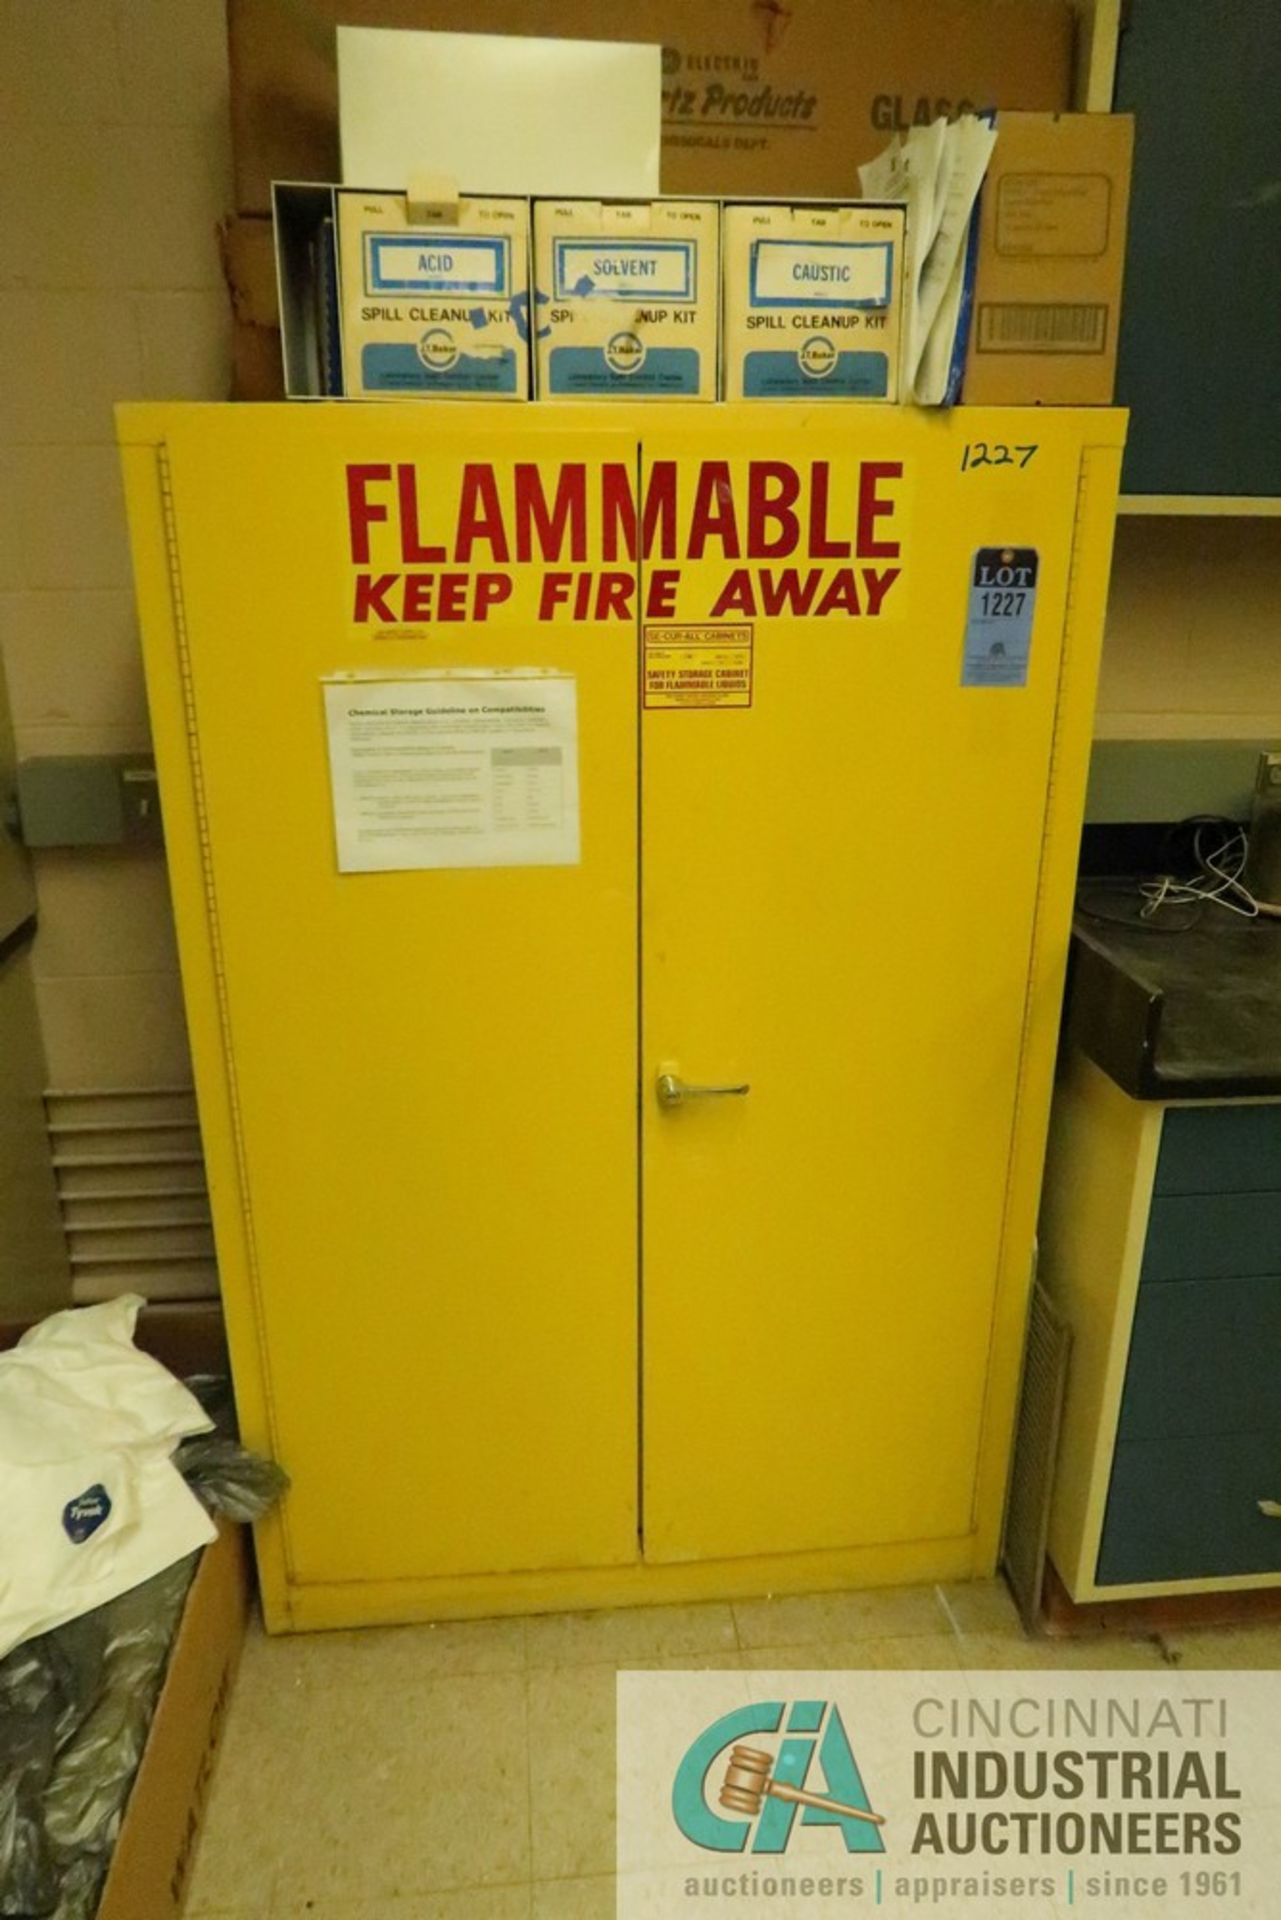 45 GALLON SE-CUR-ALL MODEL A145 FLAMMABLE LIQUID CABINET (ROOM 22) - Located in the basement